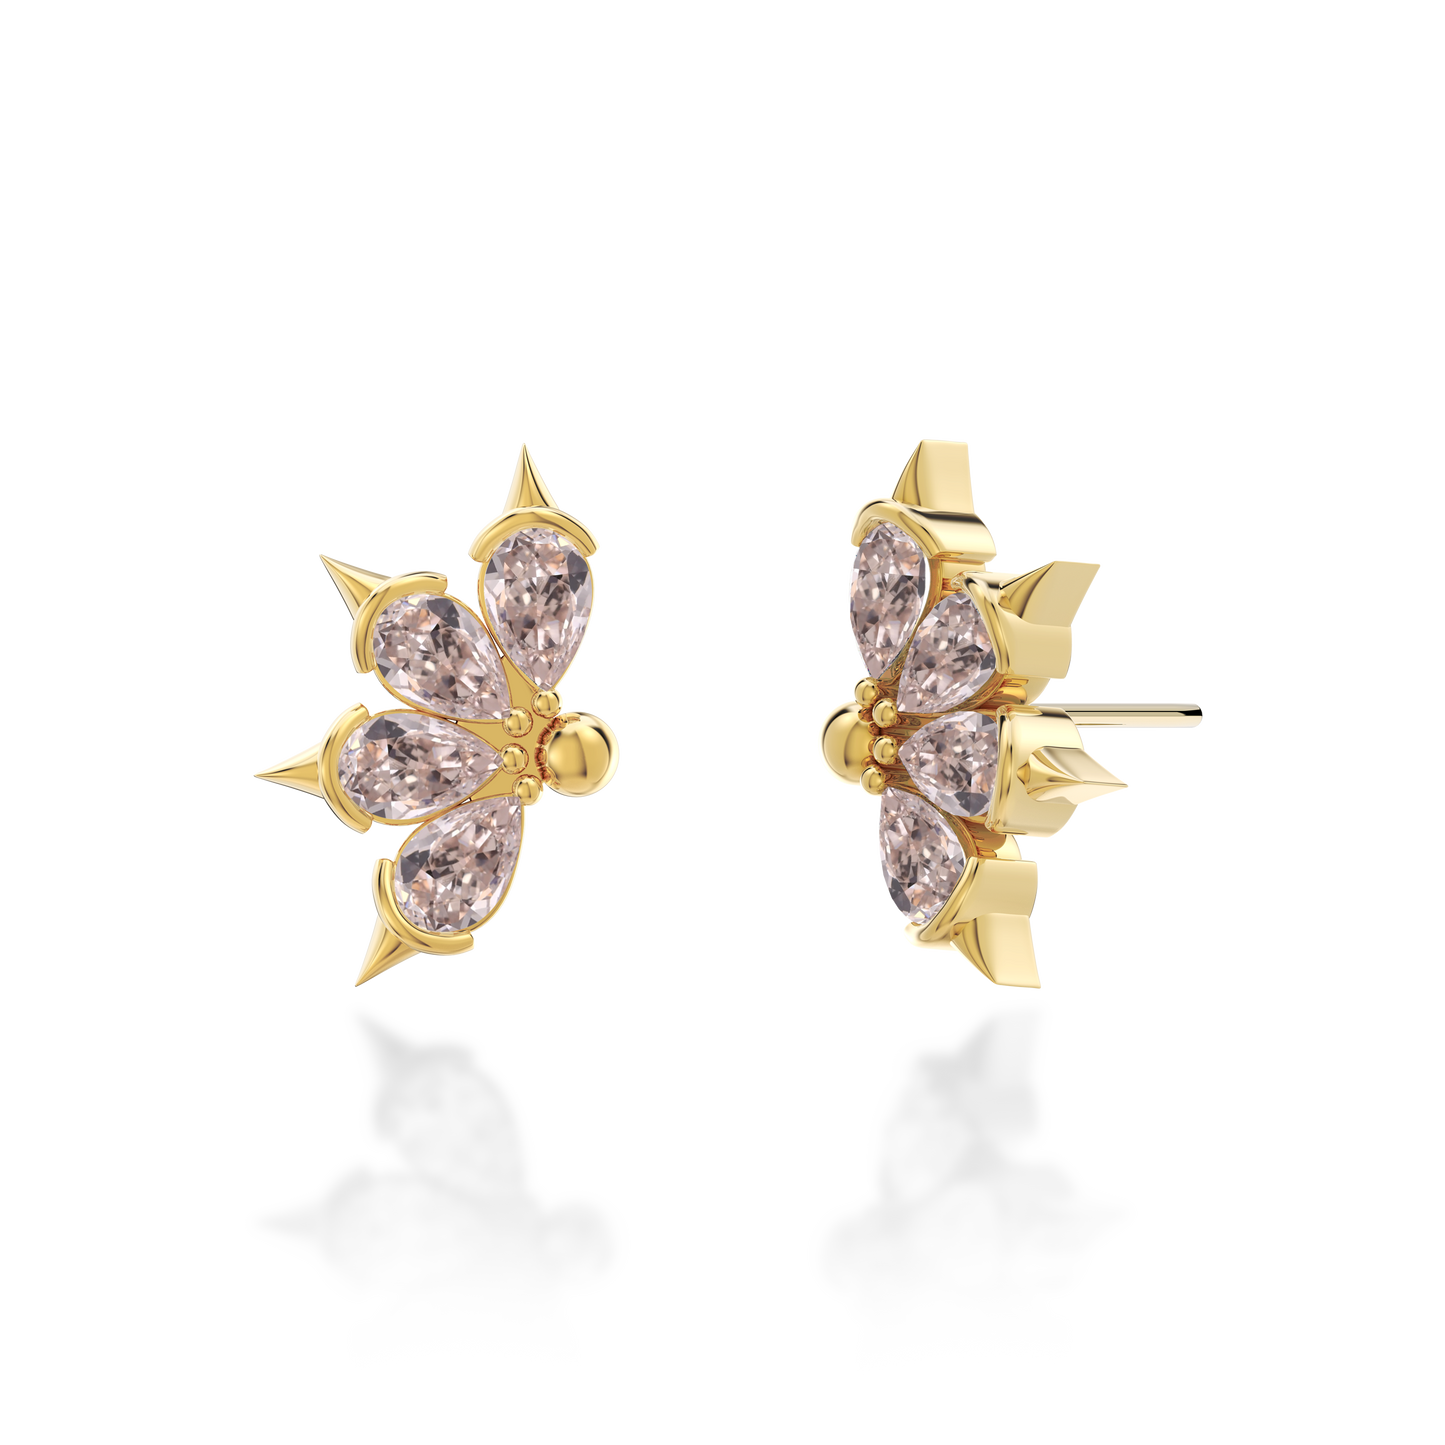 Everyday fine/semi-fine earrings in NYC that not irritate your ears –  Tagged Stud Earrings – Doviana